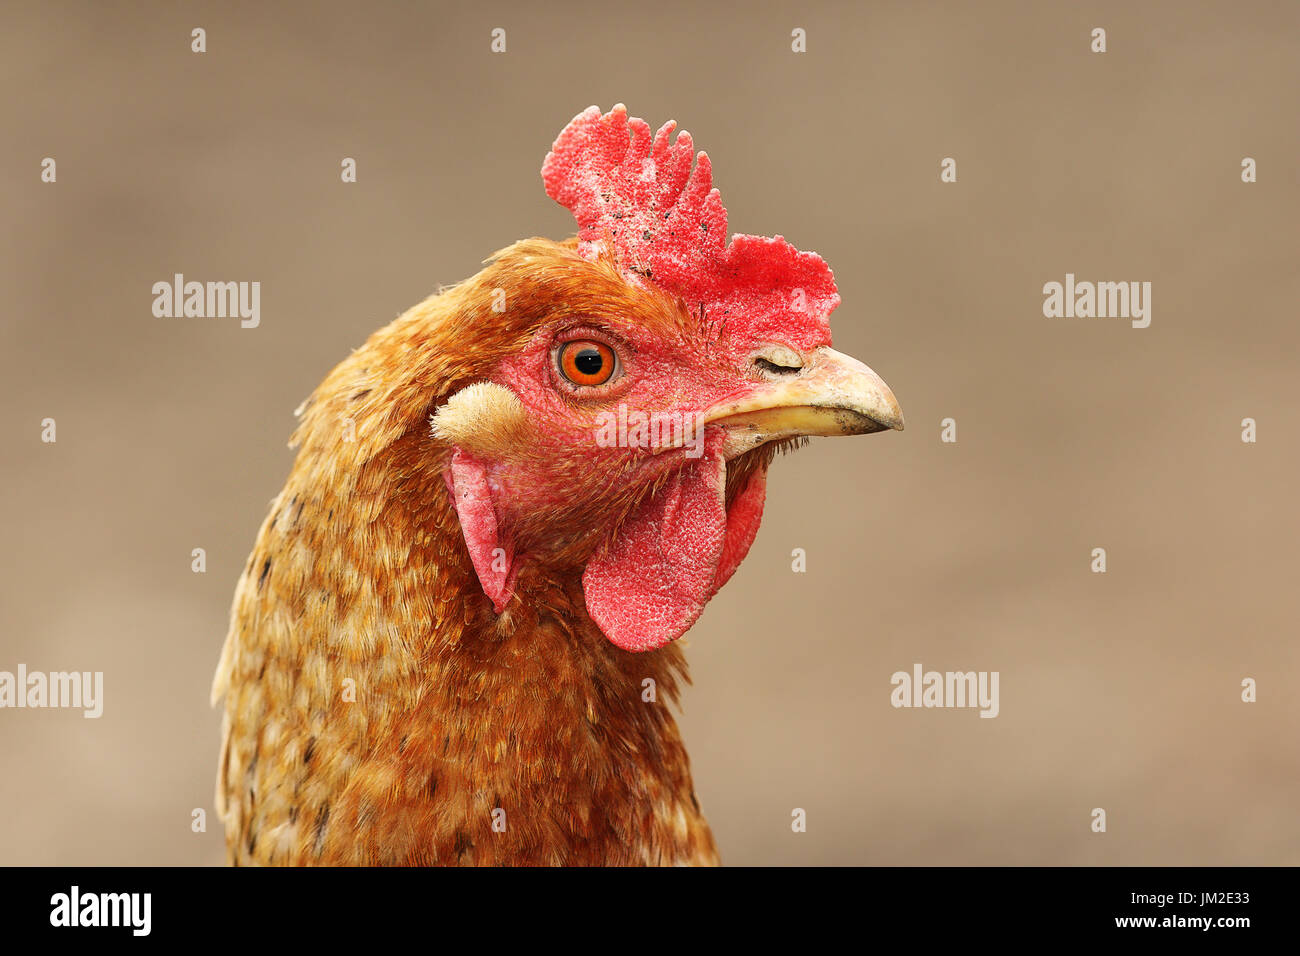 Brown feathers of hen stock photo. Image of bird, brown - 80732344